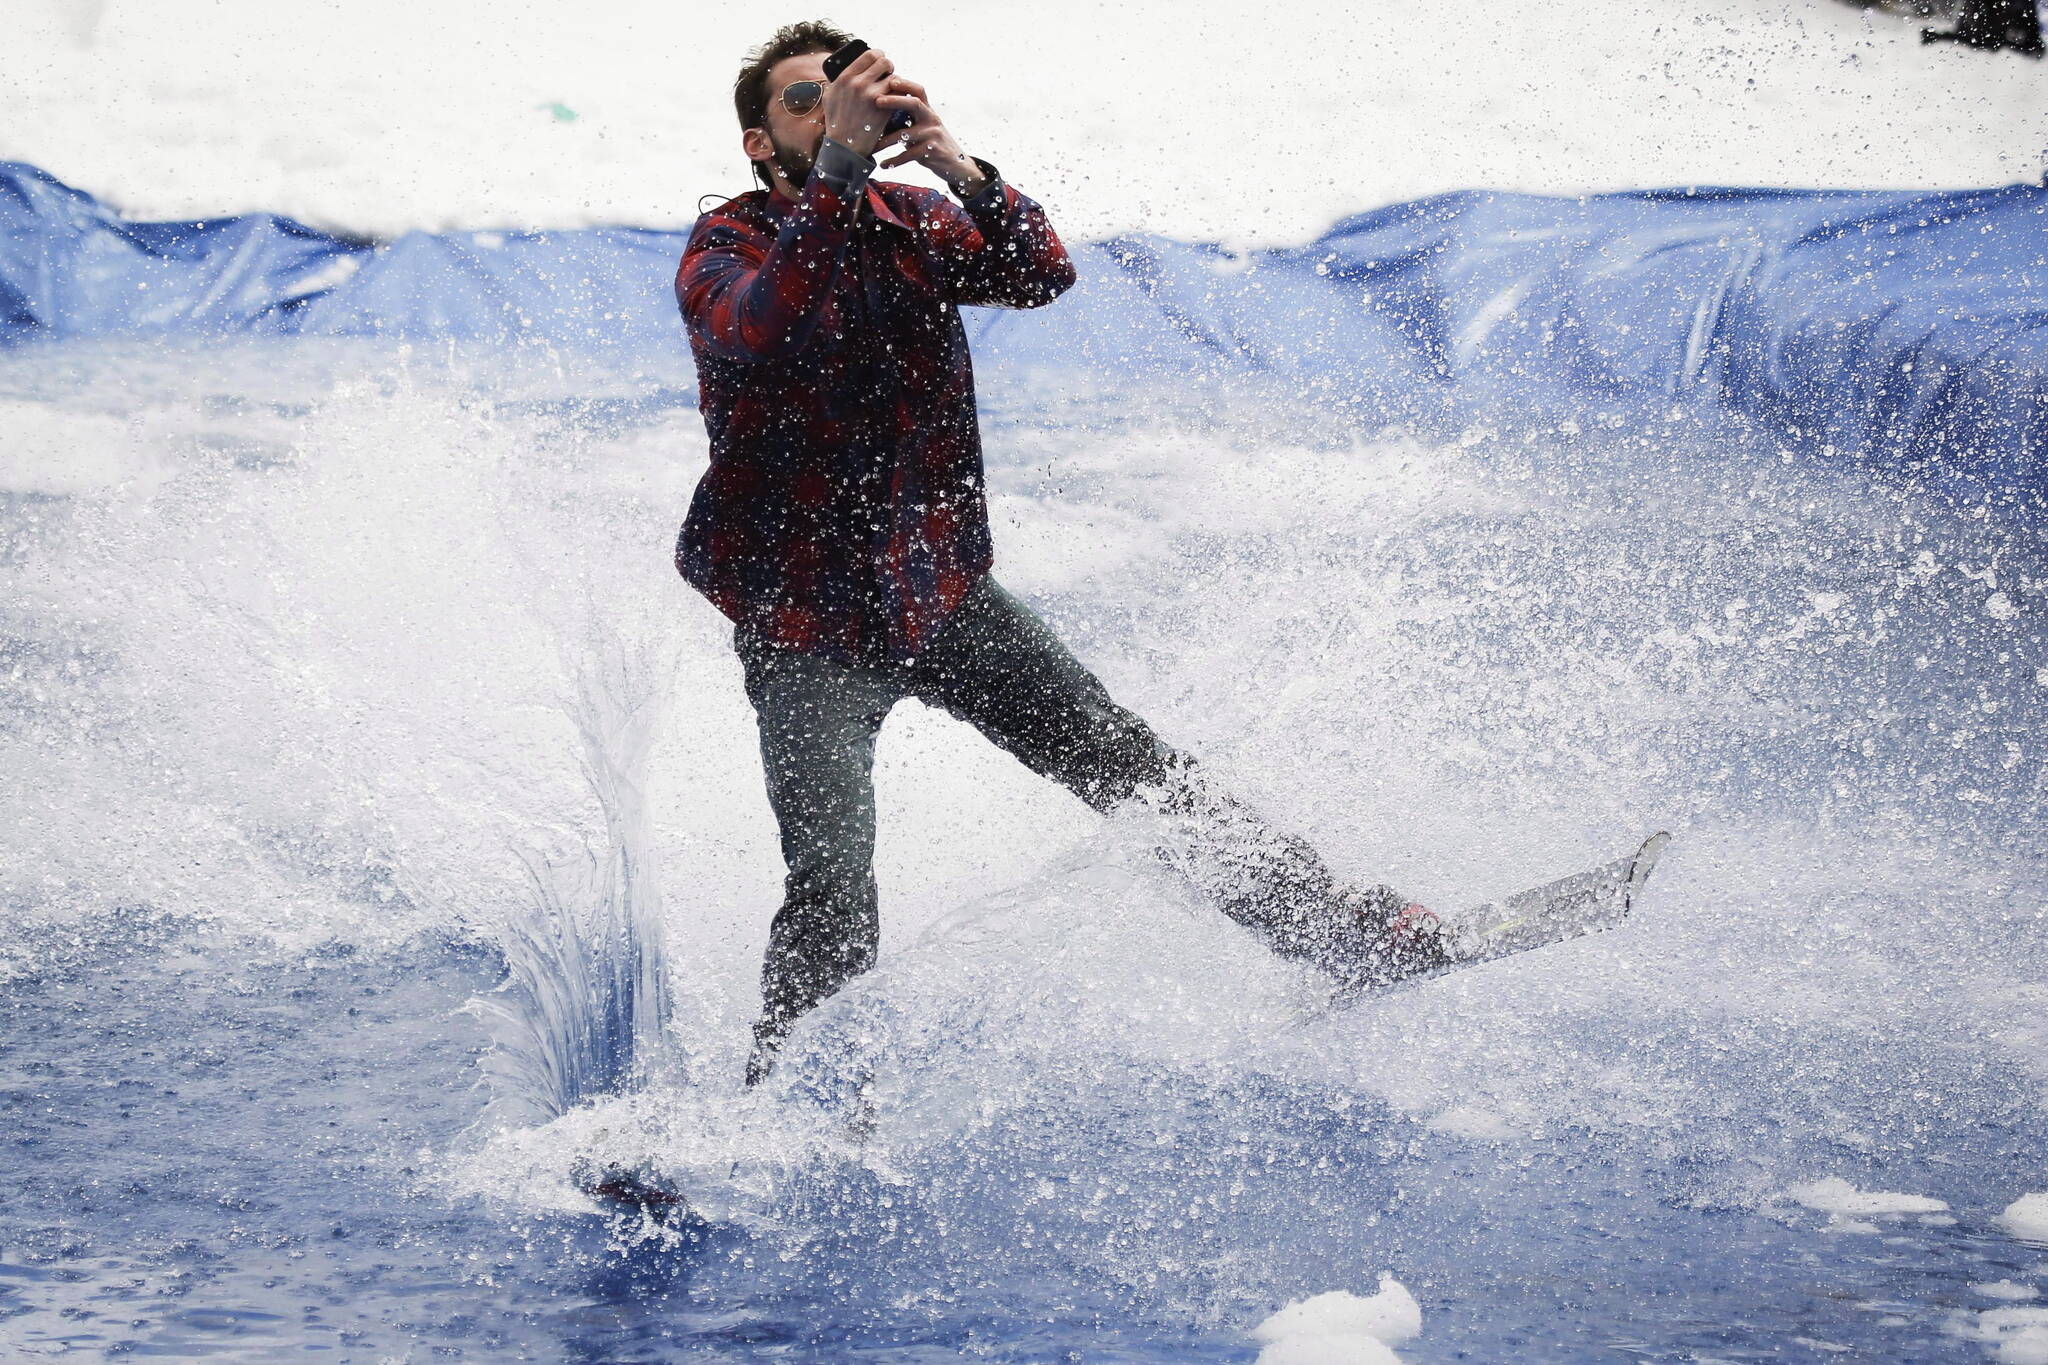 Devon Wheeler takes a selfie as he hits the water during the “Slush Cup” at Sunshine Village ski resort near Banff, Alta., Monday, May 19, 2014. This is the 86th annual event and features prizes for the best belly flop, biggest splash and best face plant. THE CANADIAN PRESS/Jeff McIntosh